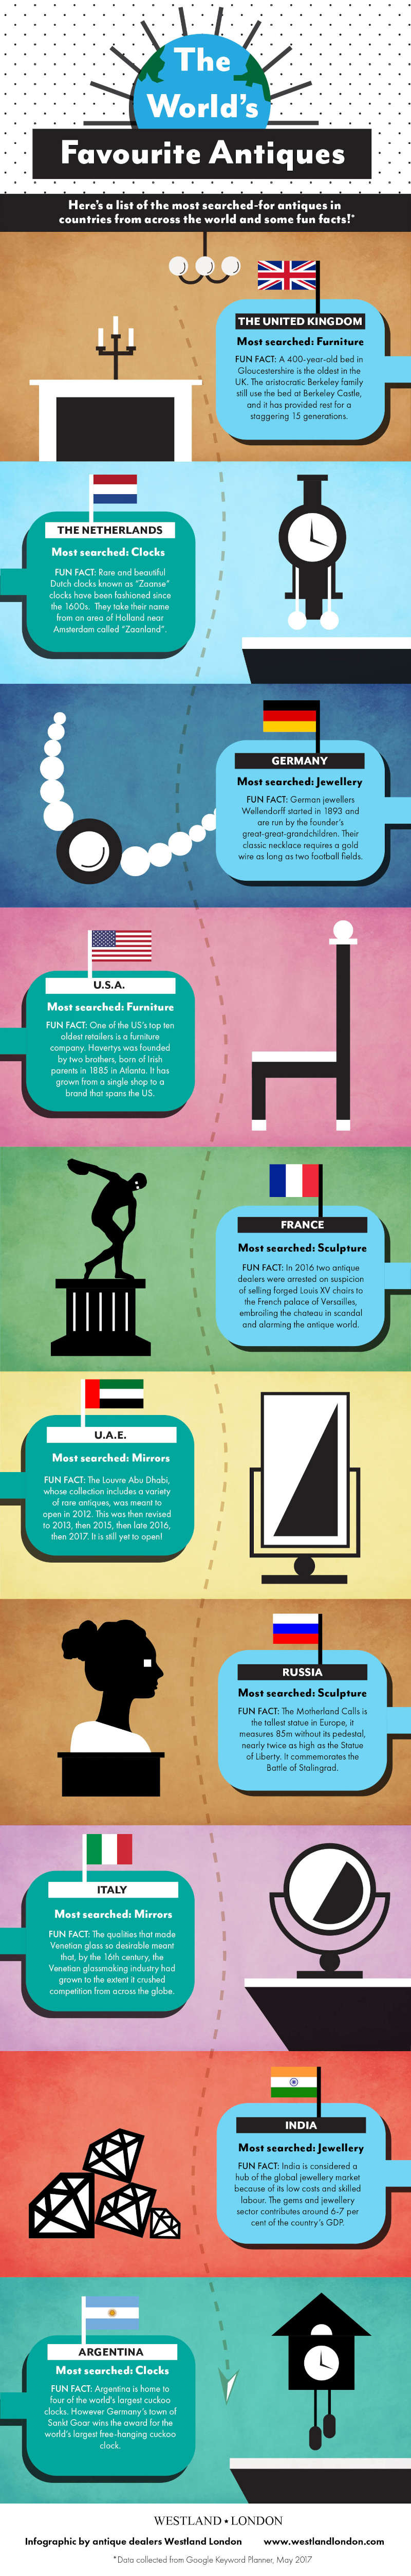 The World's Favourite Antiques: An Infographic